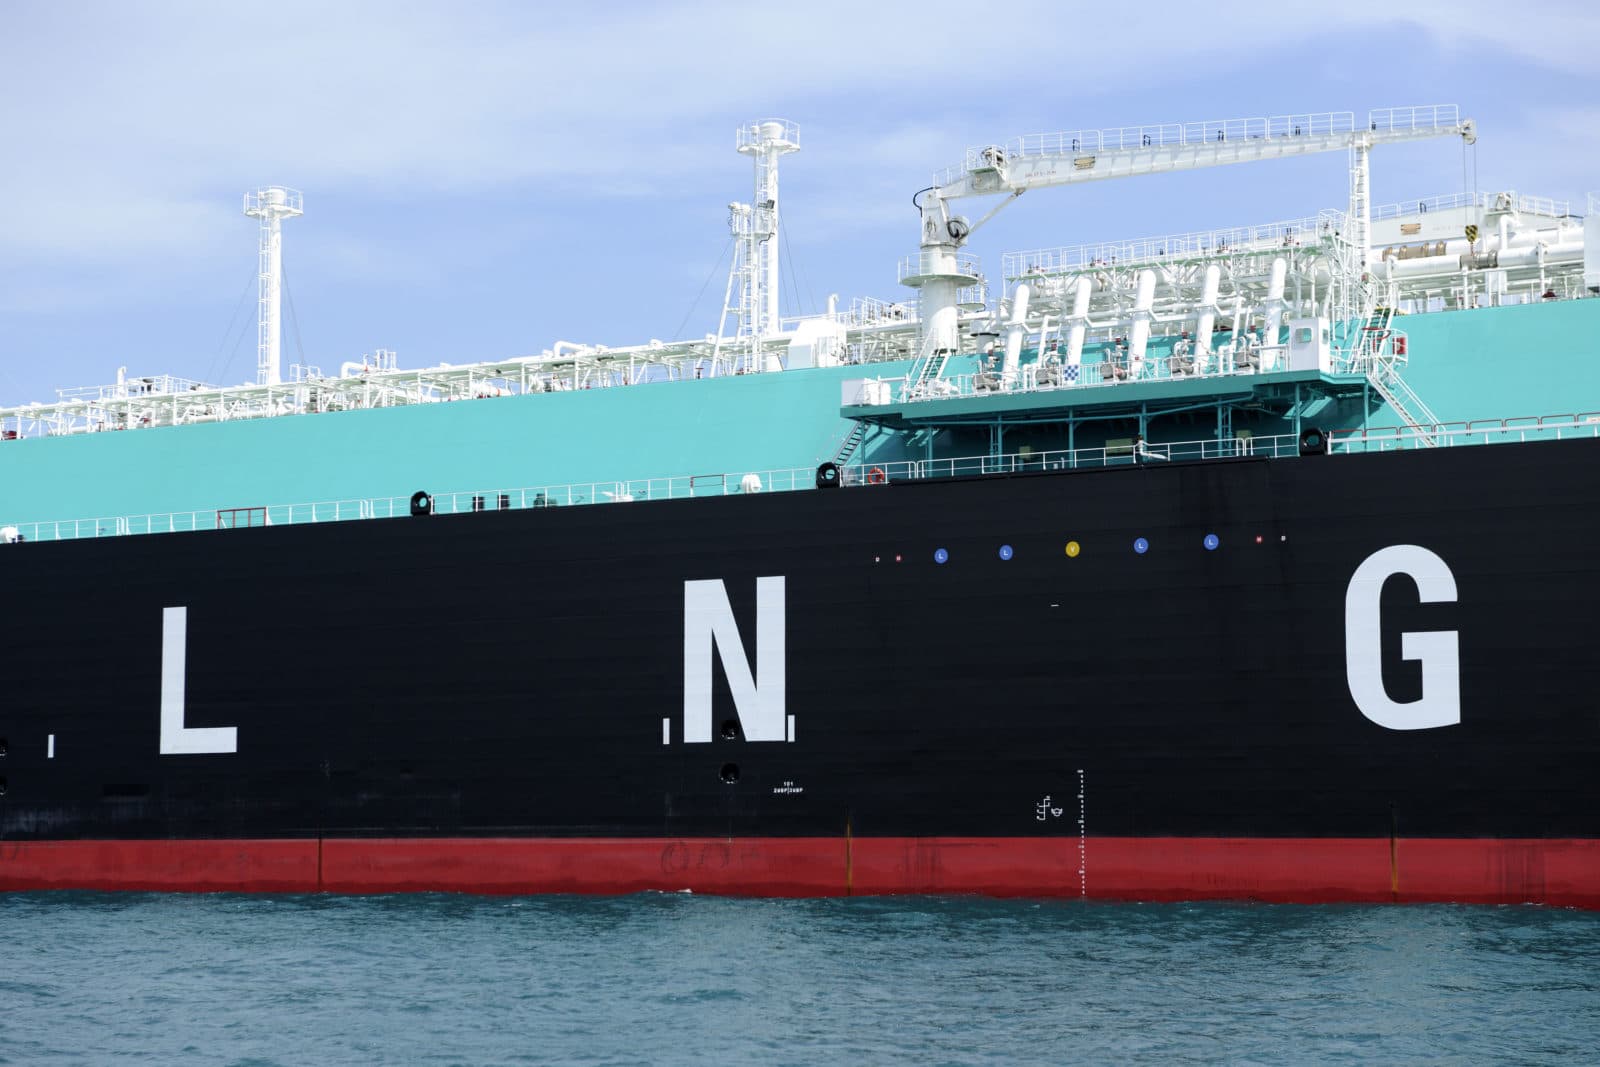 Govt Issues LNG Tenders for April 2021 in Advance to Avoid Criticism